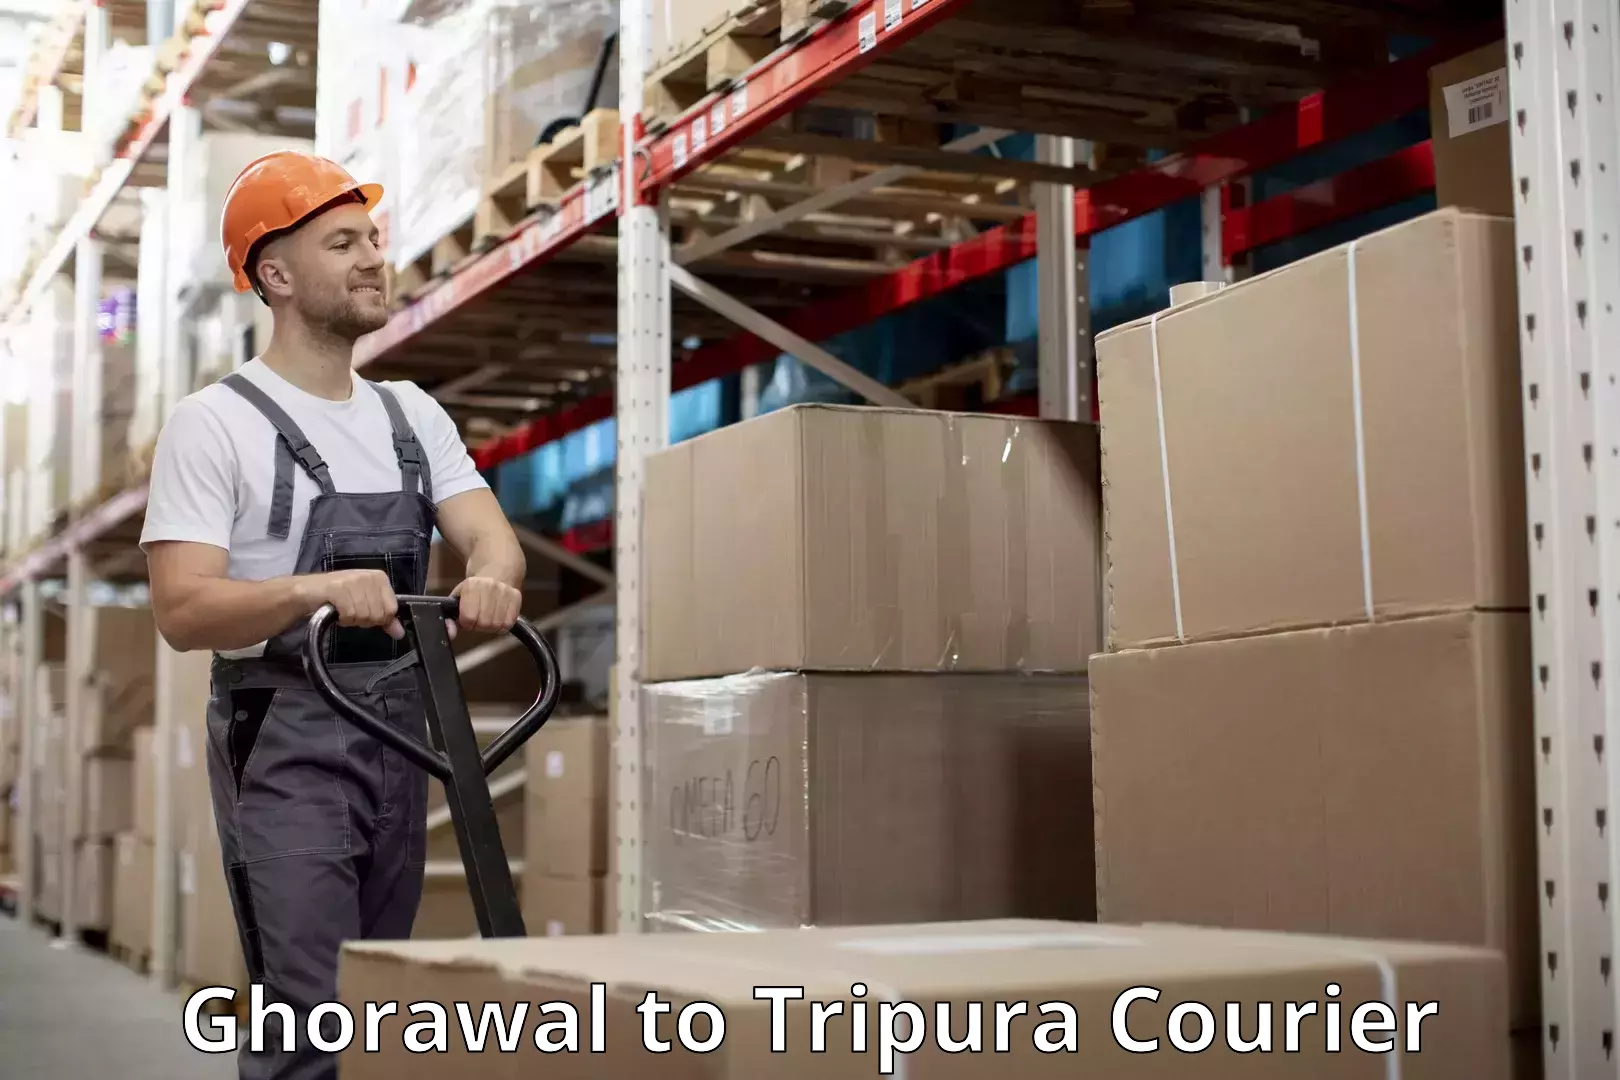 Luggage transport consultancy Ghorawal to Tripura